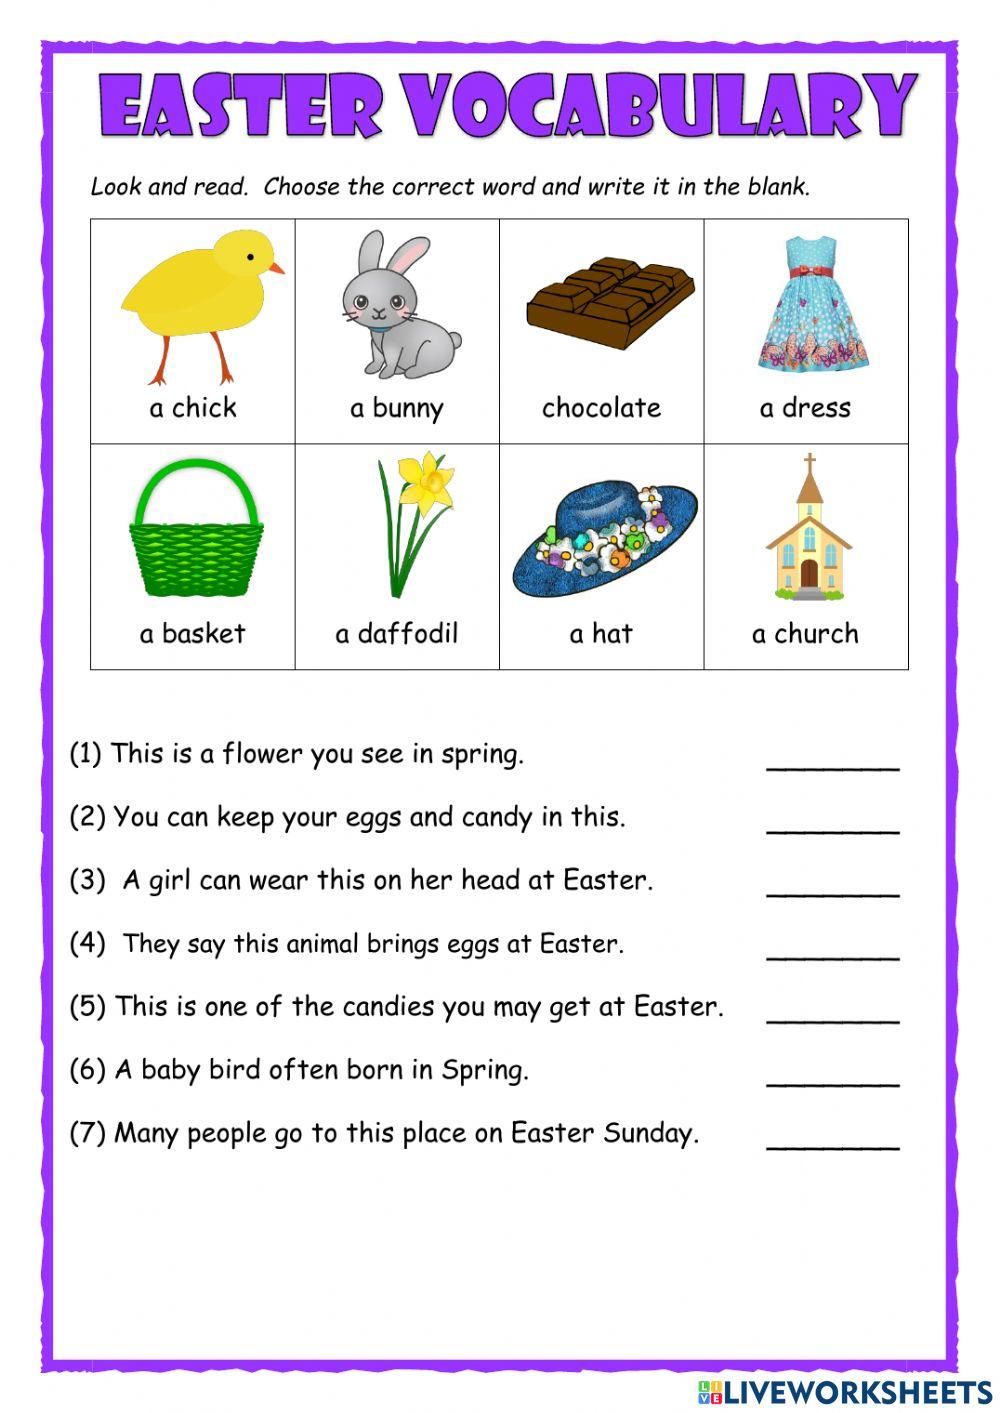 Easter Vocabulary for Young Learners